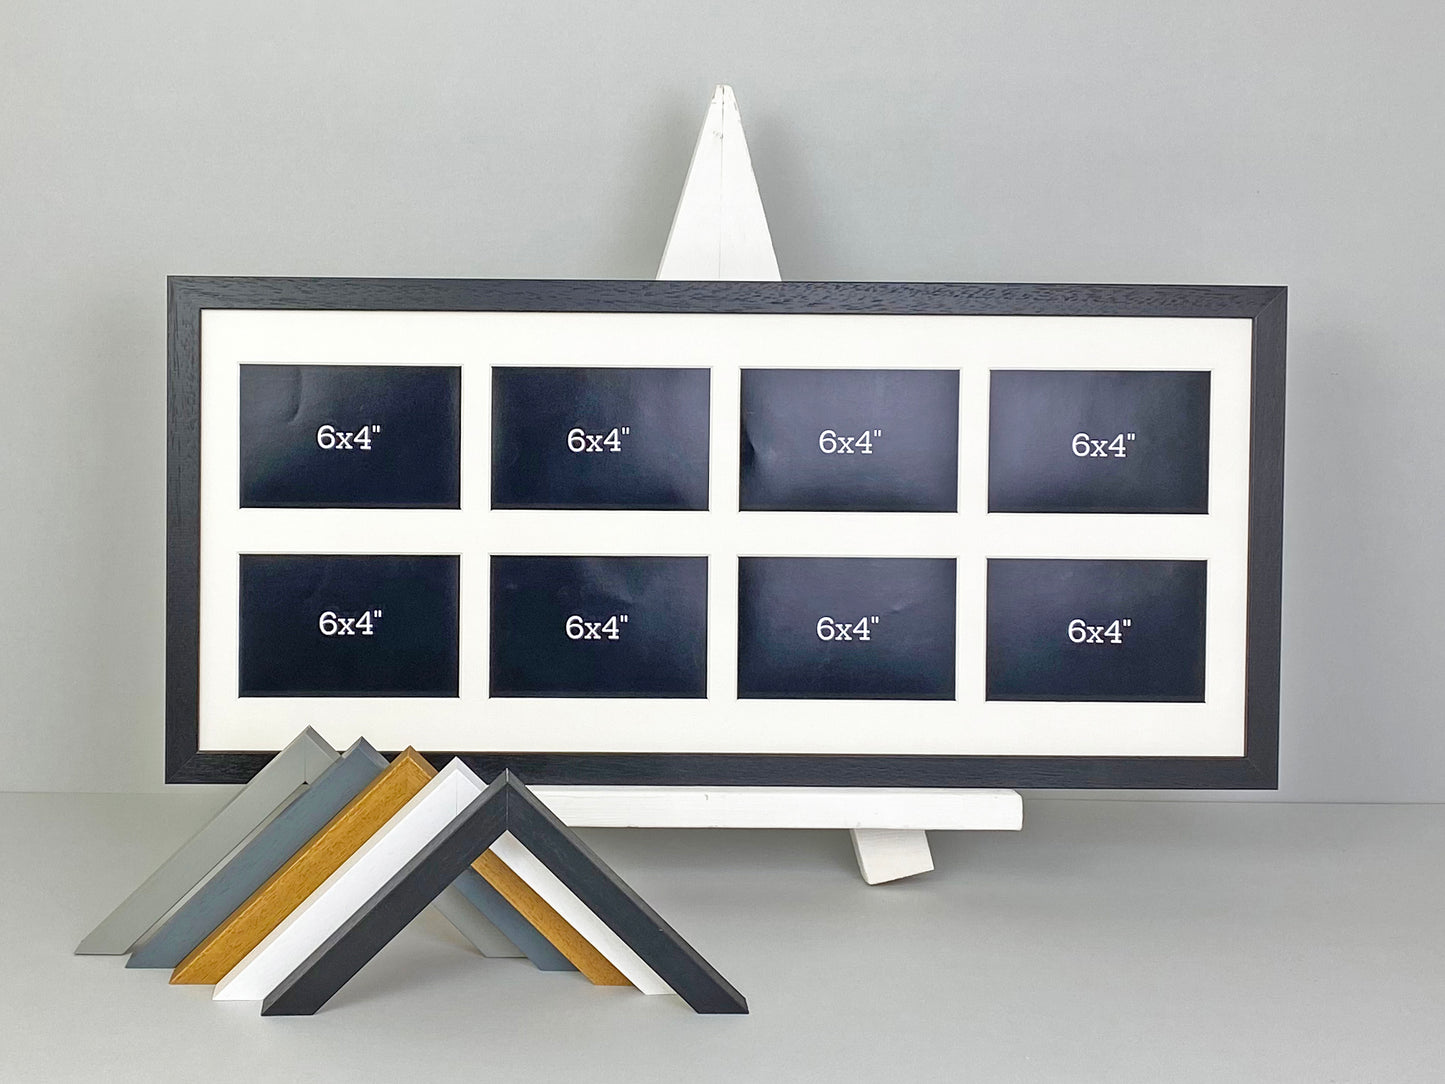 Suits Eight 6x4" Photos. 30x75cm. Wooden Frame for Multiple Pictures.